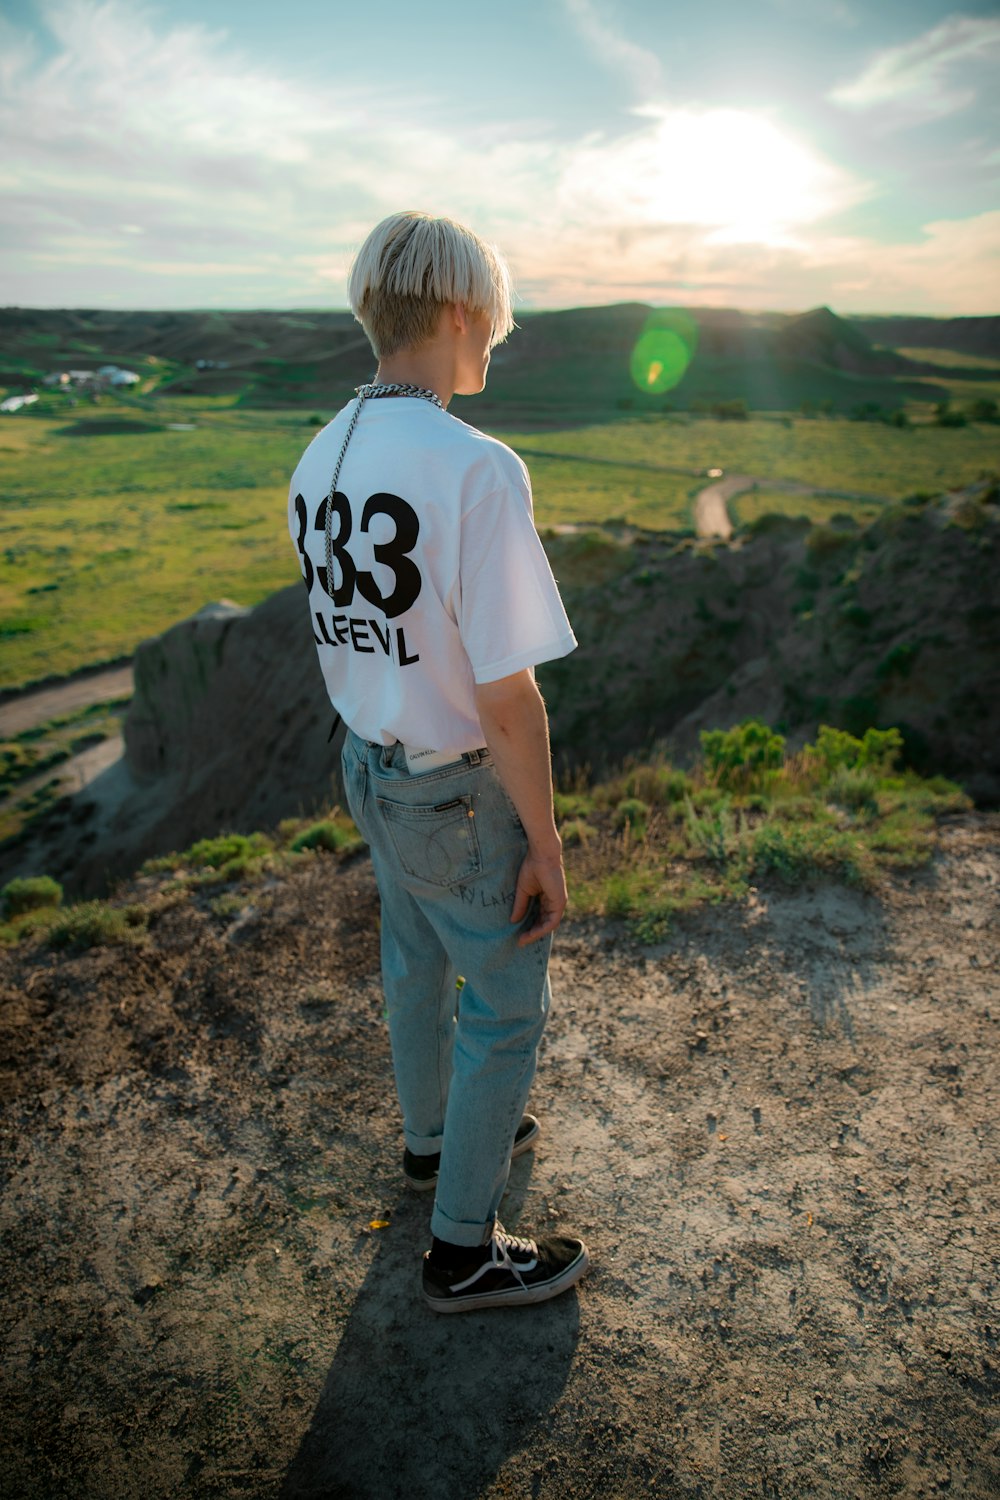 boy in white t-shirt and blue denim jeans standing on dirt ground during daytime